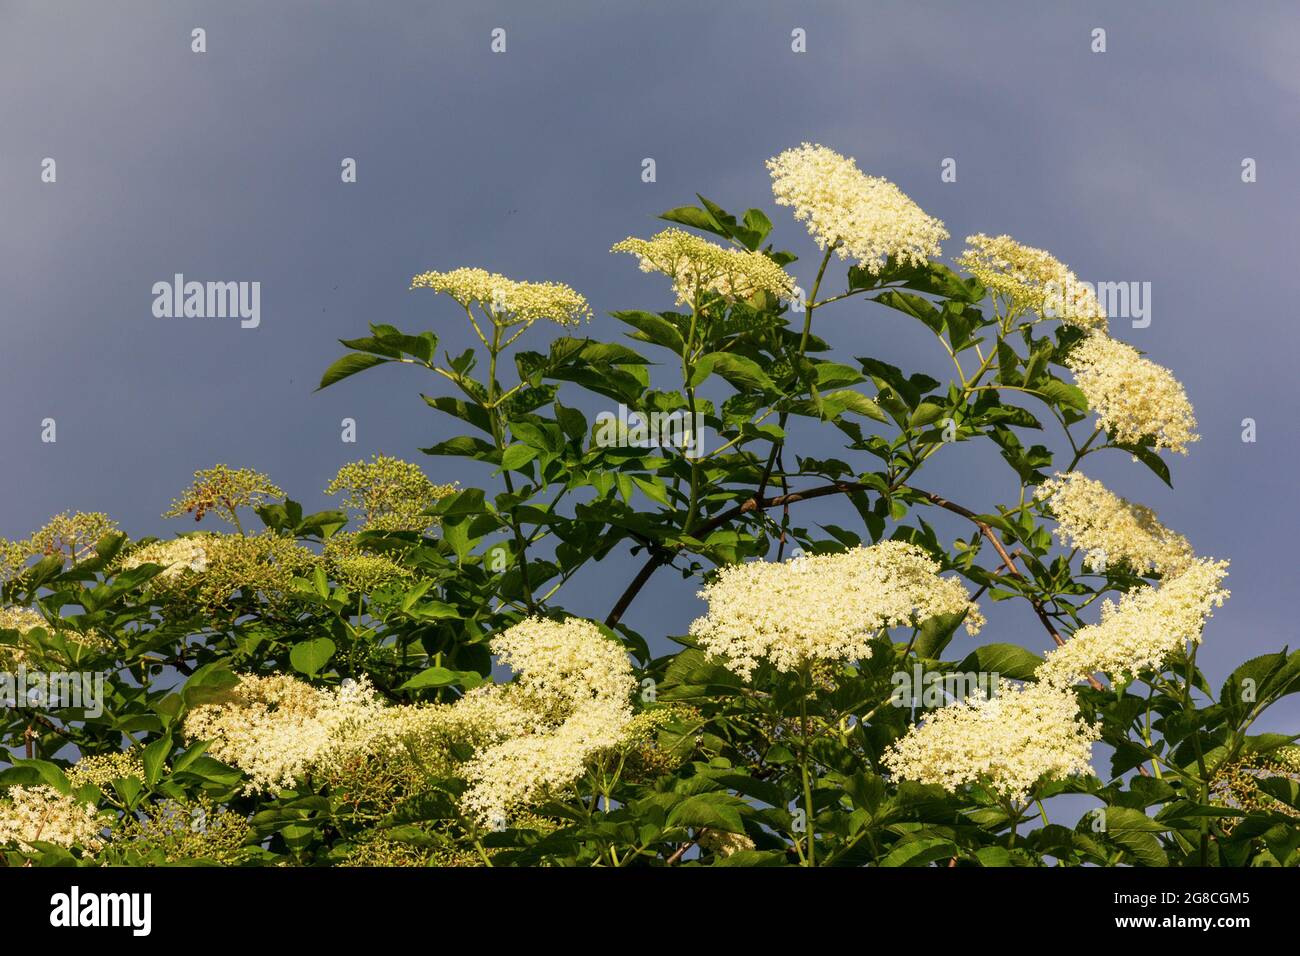 a large flowering elderberry tree against a cloudy sky Stock Photo